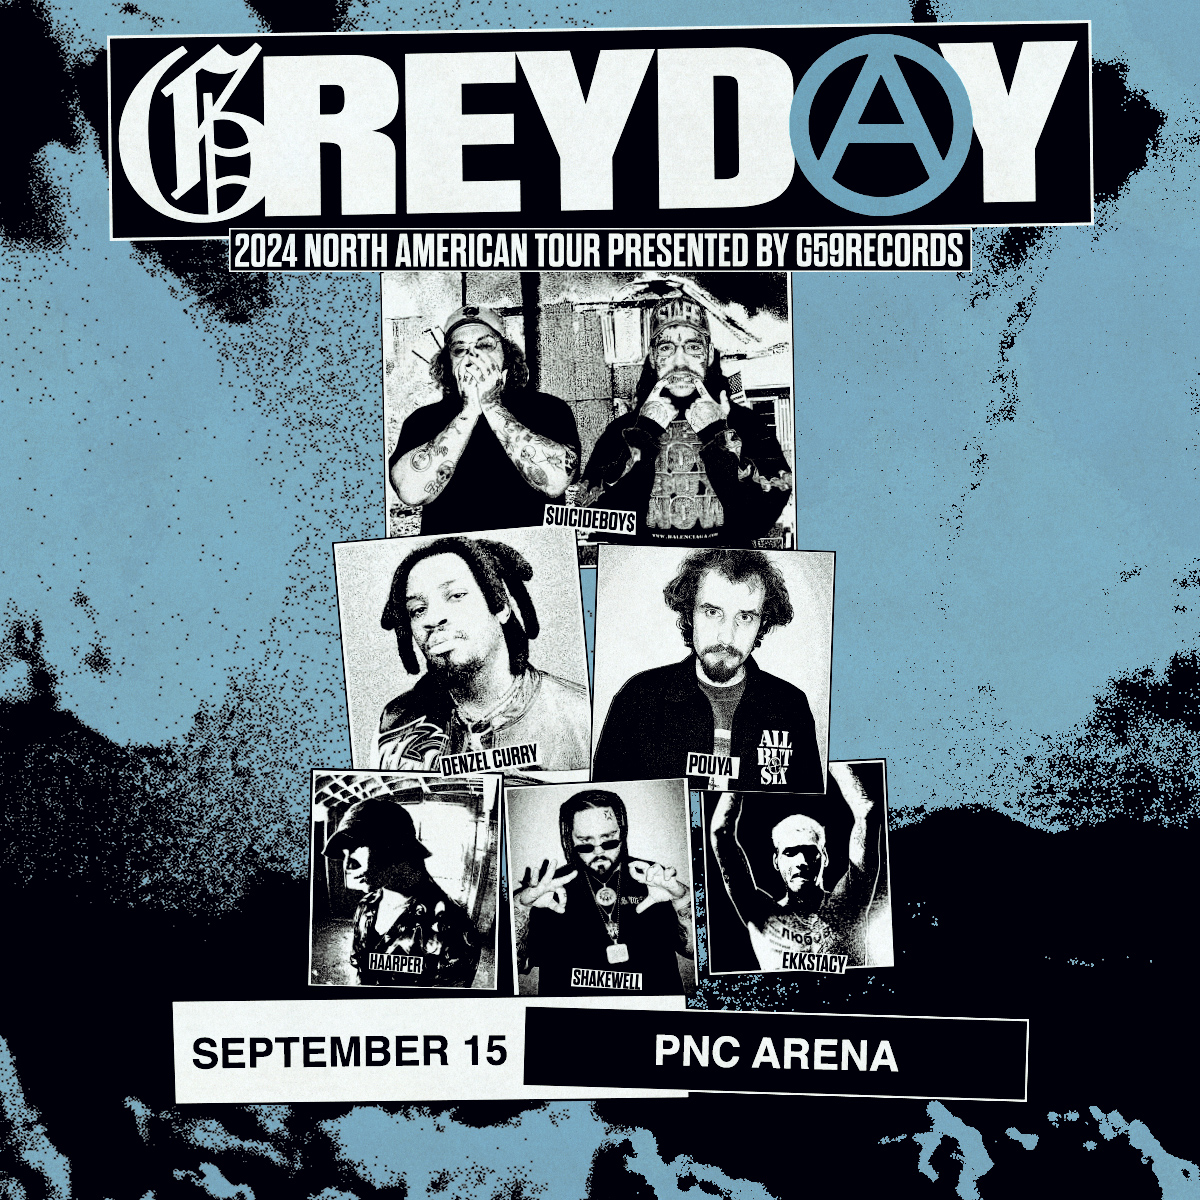 RALEIGH, SEPTEMBER 15 GREY DAY TOUR 2024 TICKETS AVAILABLE NOW. @SUICIDEBOYS, @denzelcurry, @Pouyalilpou, @haarper77, @ShakeWell818, & @ekkstacy REPENT NOW BEFORE IT’S TOO LATE: bit.ly/SUICIDEBOYS_RA…